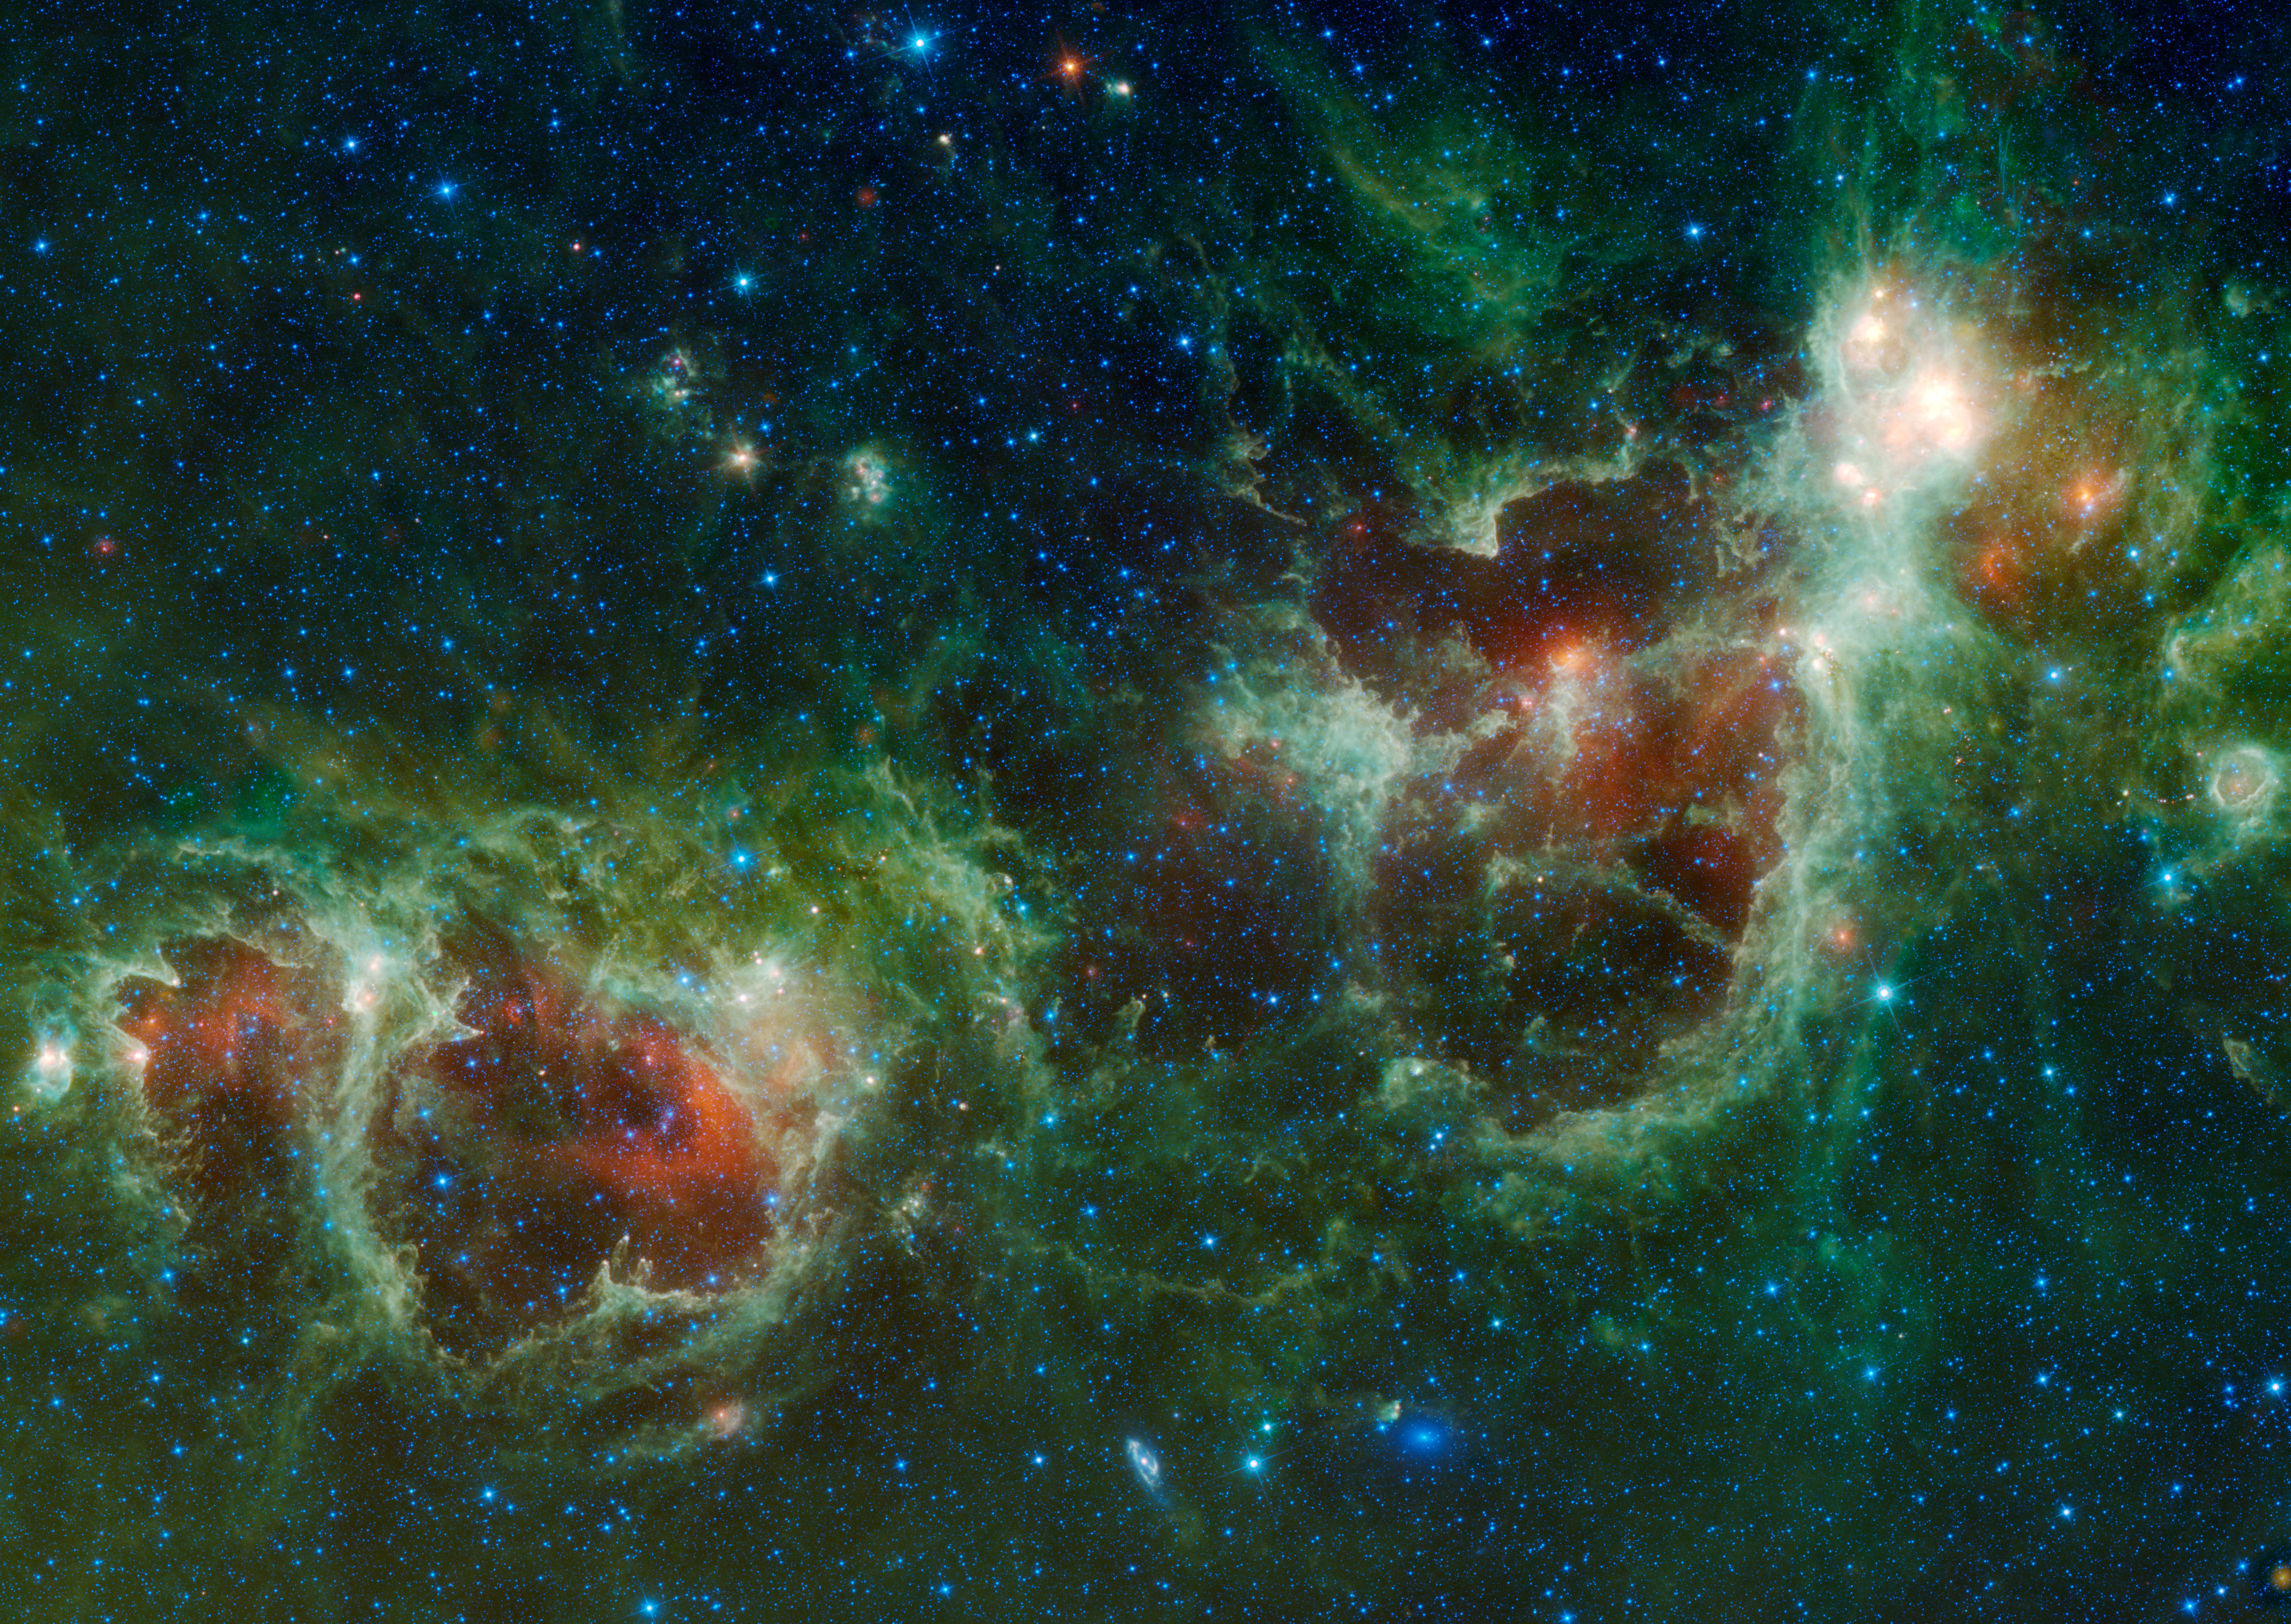 A starry background is covered by green clouds of material. There are two reddish bubbles, each surrounded by a thin tendril of pale green light, one lies at the lower left of the image, the other in the center right.